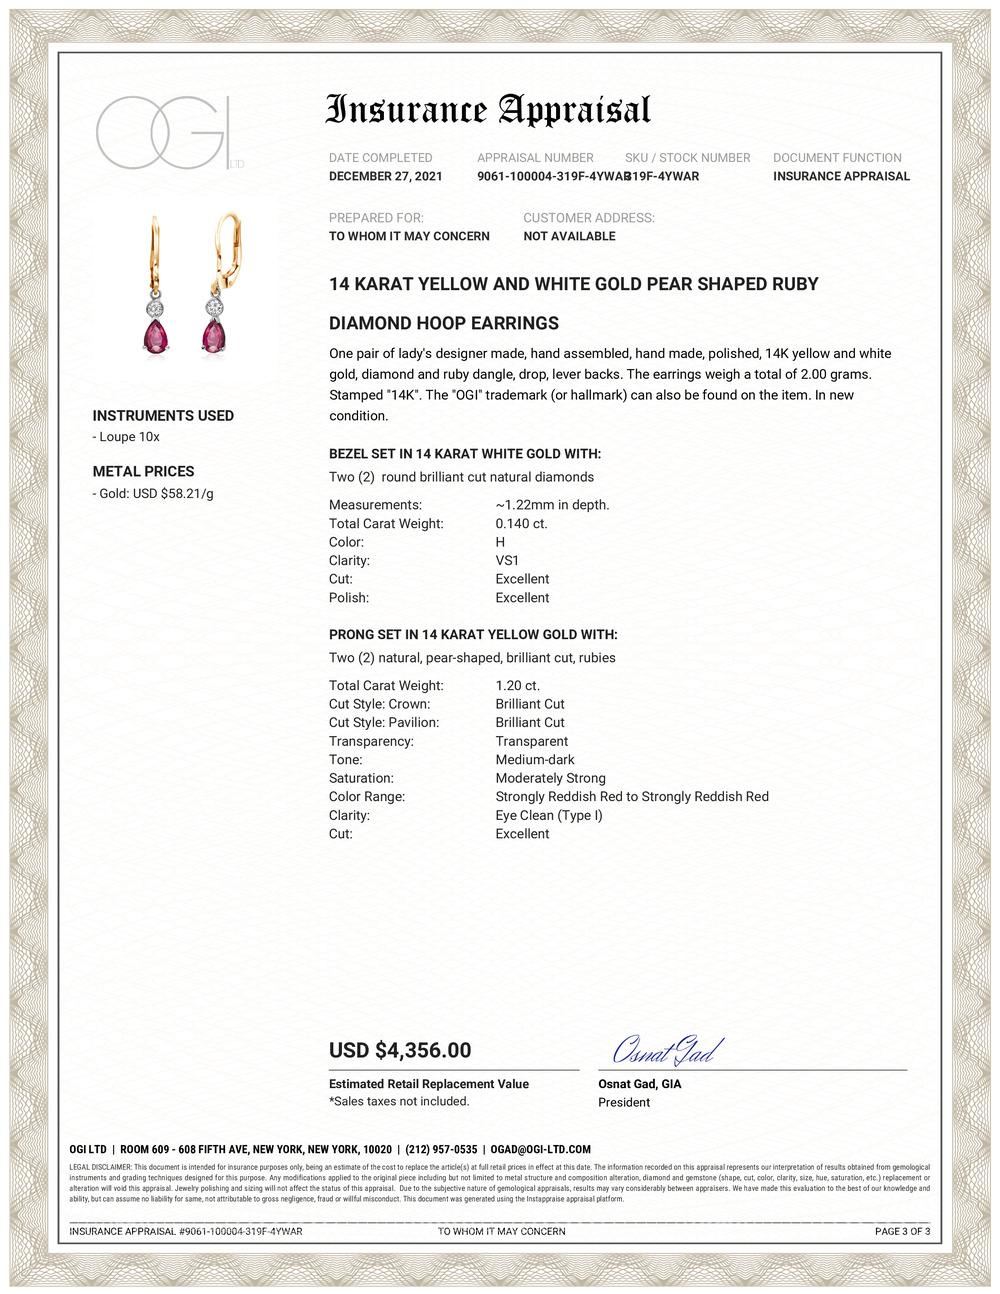 Fourteen karats white and yellow gold lever back drop hoop earrings 
Two pear-shaped Burma rubies weighing 1.20 carat 
Two Diamonds weighing 0.14 carat 
Earrings measuring 1 inch x 0.30 inch
One of a kind earrings 
New Earrings  
Pear shaped Burma